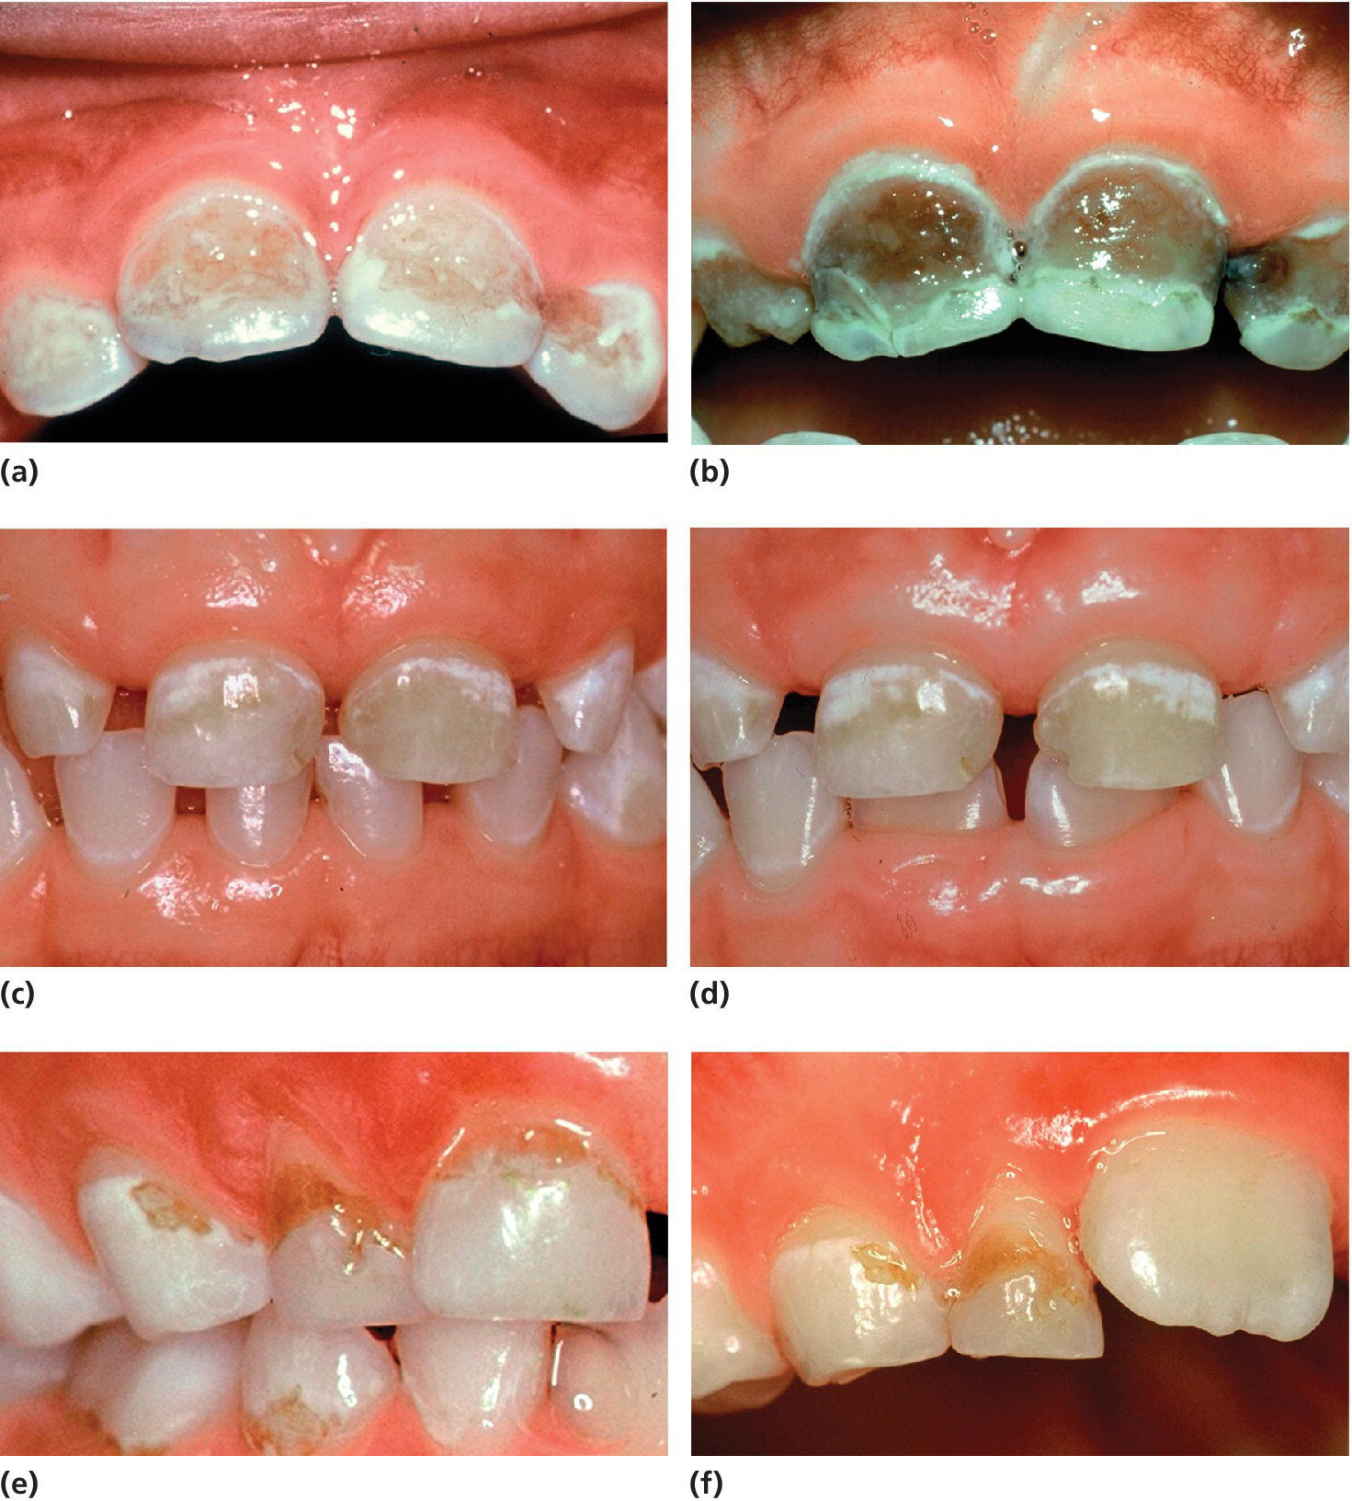 Photos of the teeth of an 11-month-old girl (a,b), 4-year-old- boy (c,d), and 6-year-old boy (e,f), with each displaying caries progression.